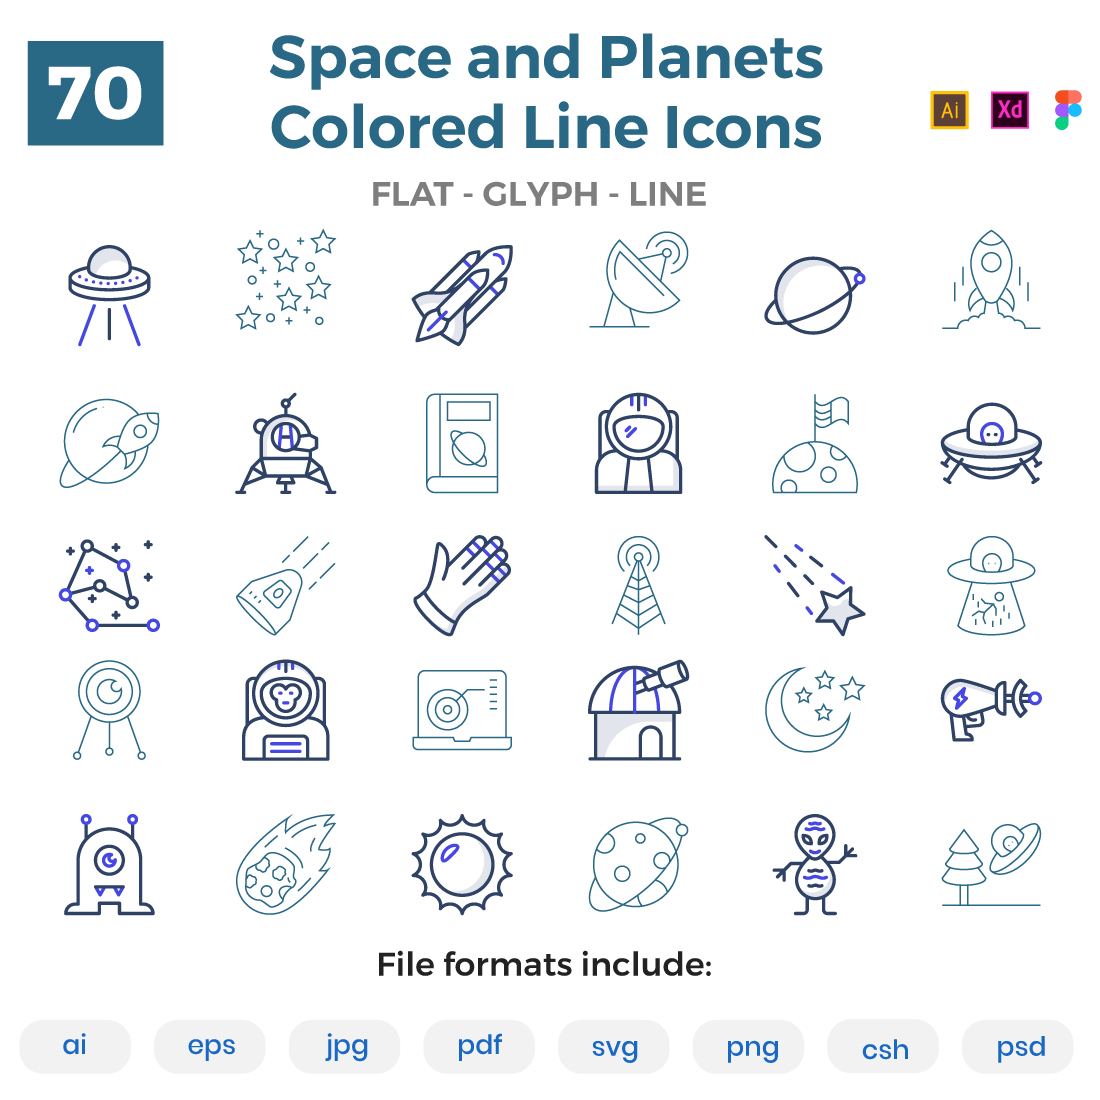 70 Space Colored Line Icons Pack cover image.